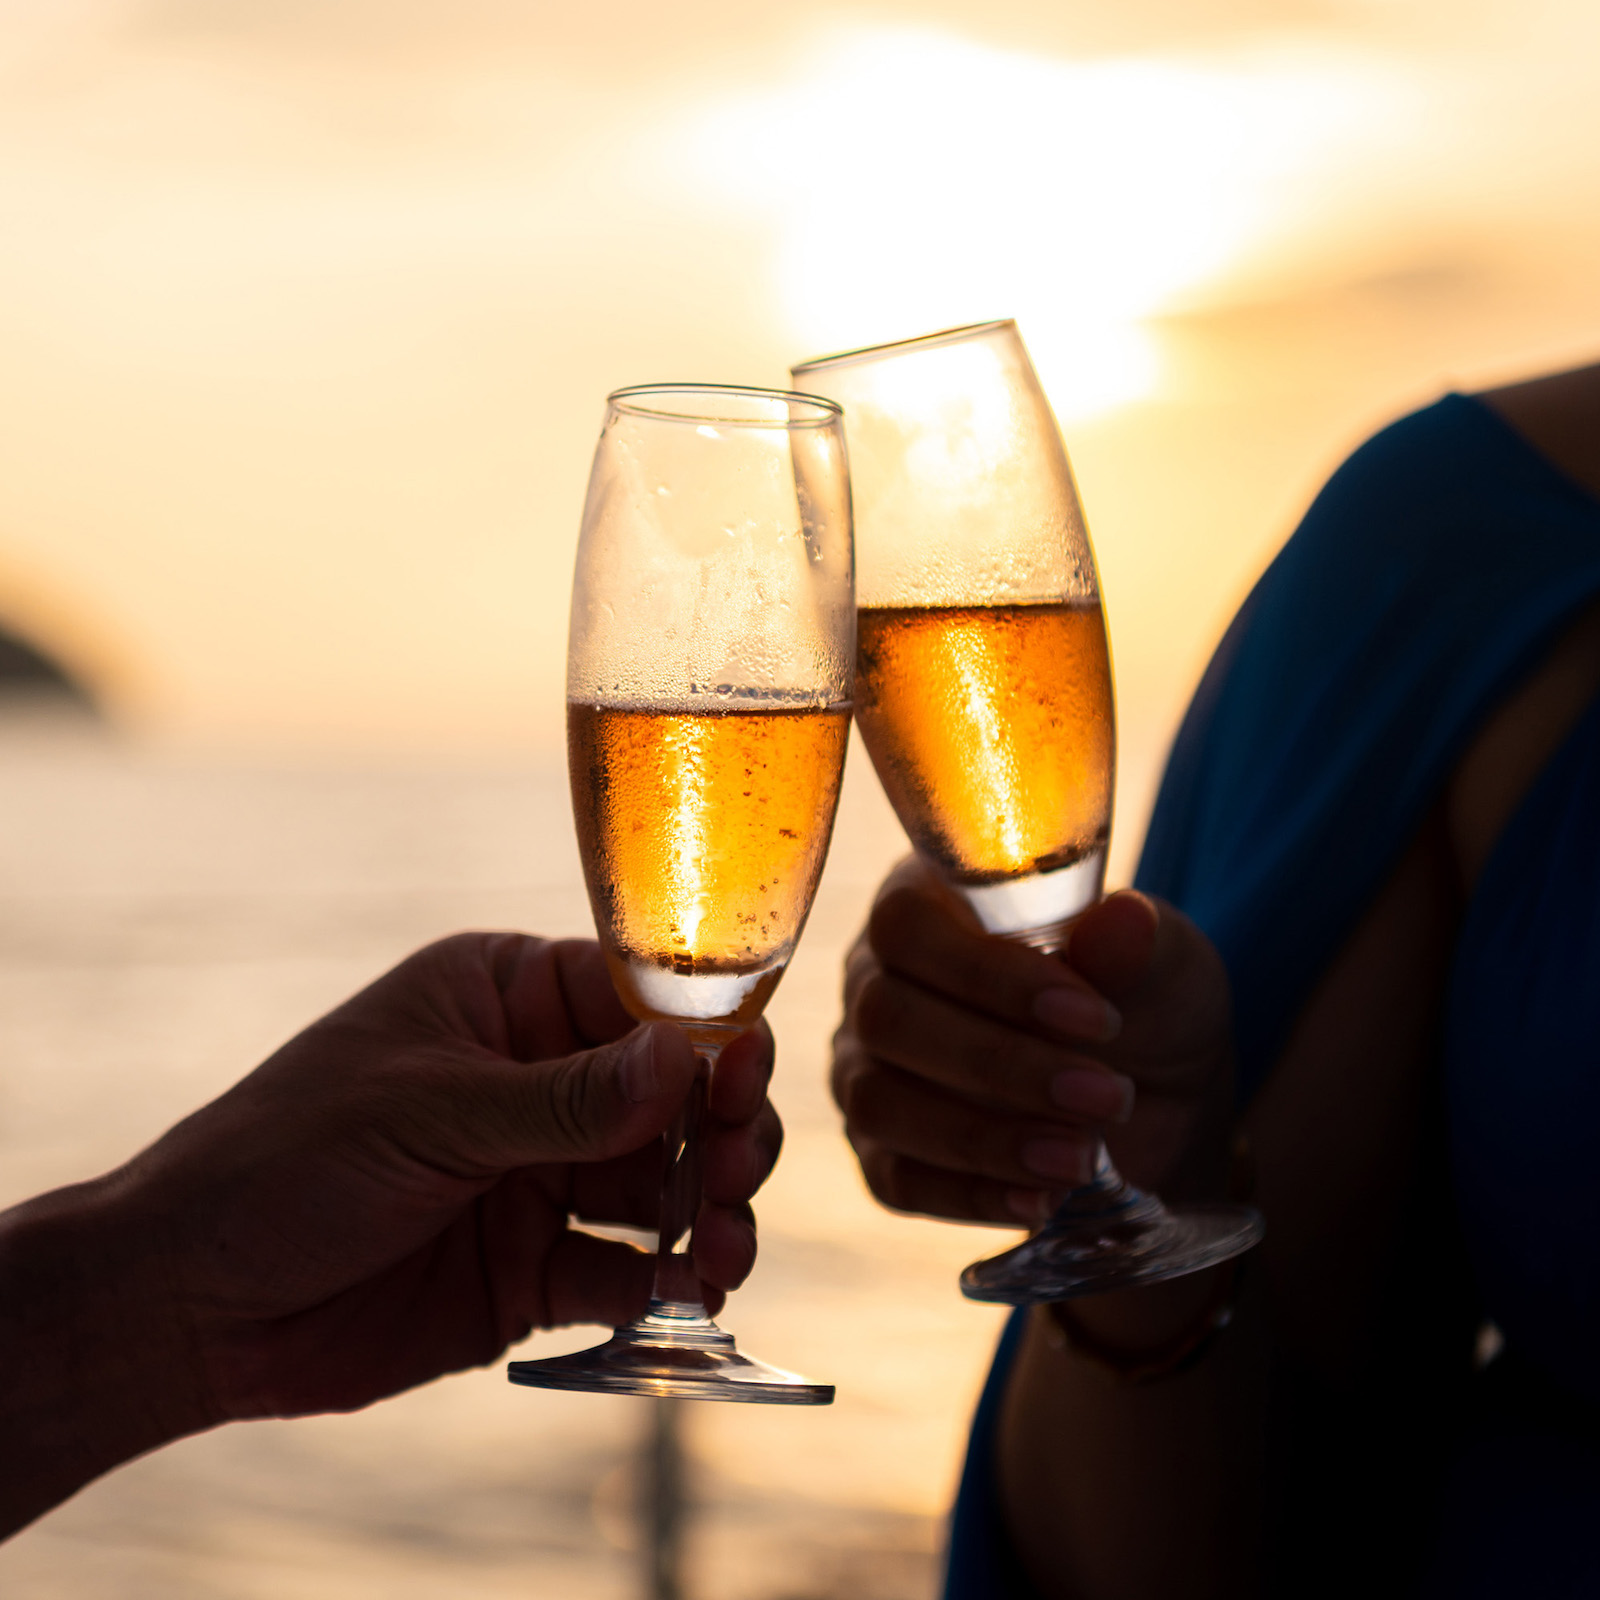 Hand,Holding,A,Glass,Drinking,Wine,On,Sunset,Sea,Background.